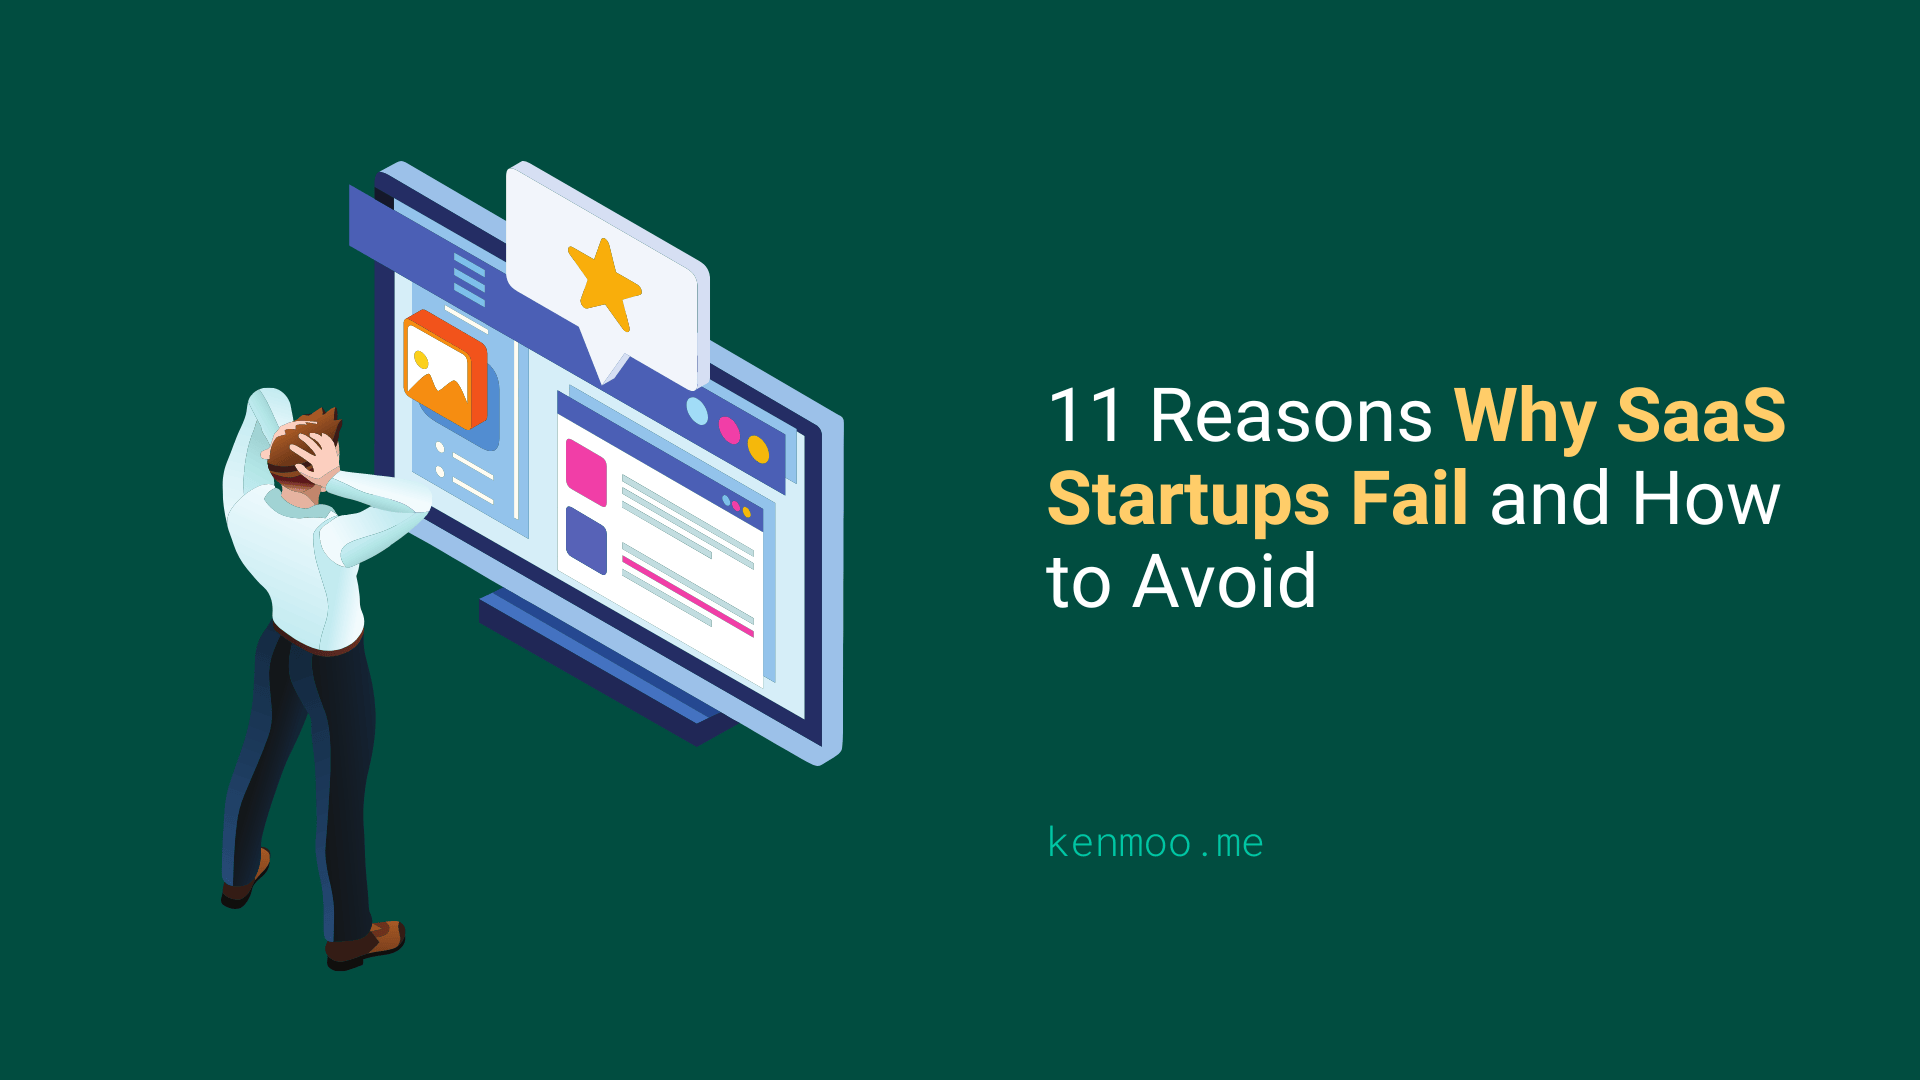 11 Reasons Why SaaS Startups Fail and How to Avoid